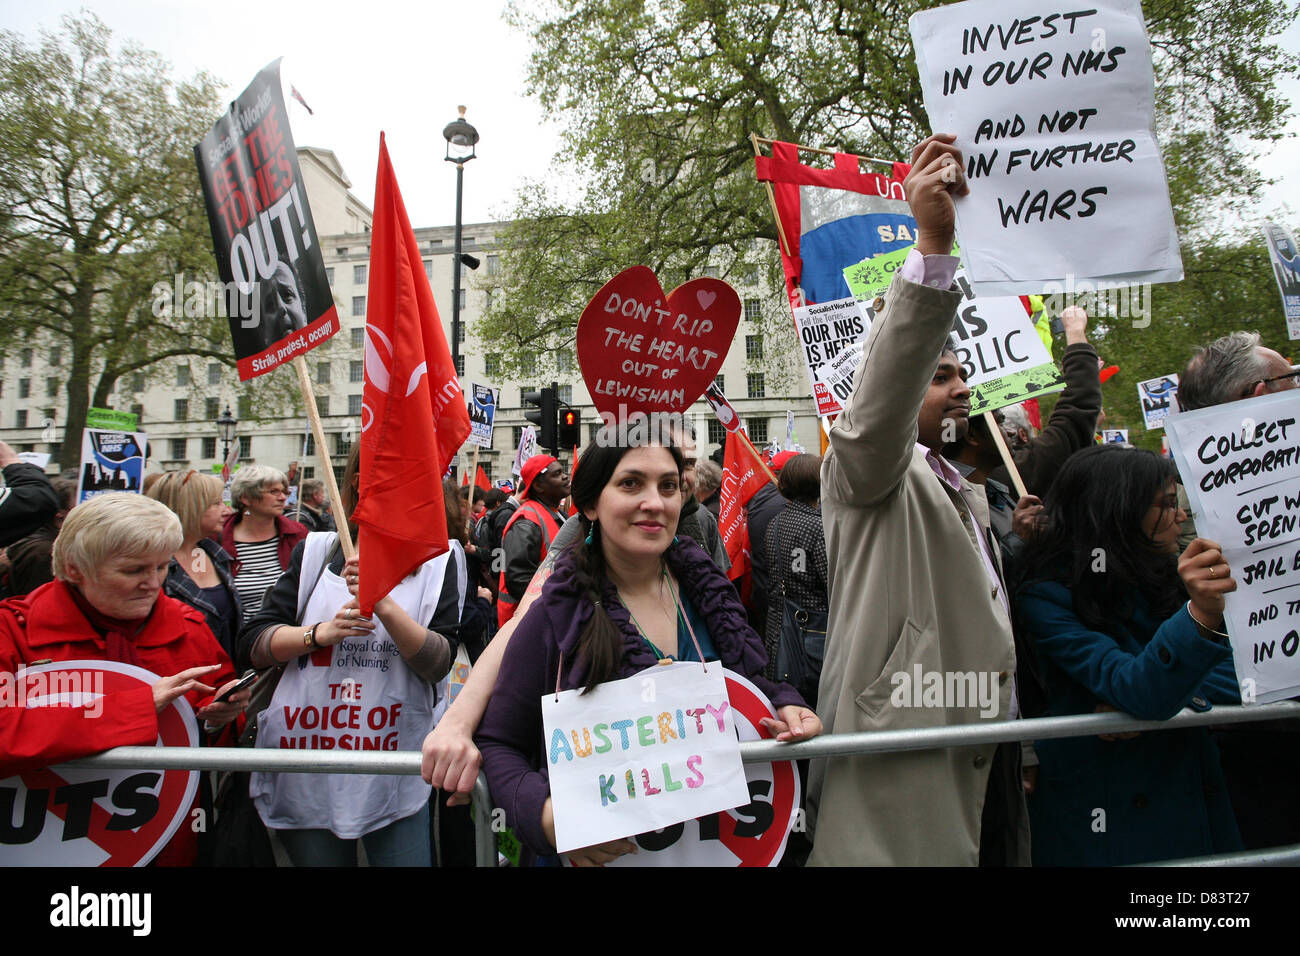 London, UK. 18th May 2013. Thousands march to Downing Street to protest cuts in the NHS  Credit:  Mario Mitsis / Alamy Live News Stock Photo